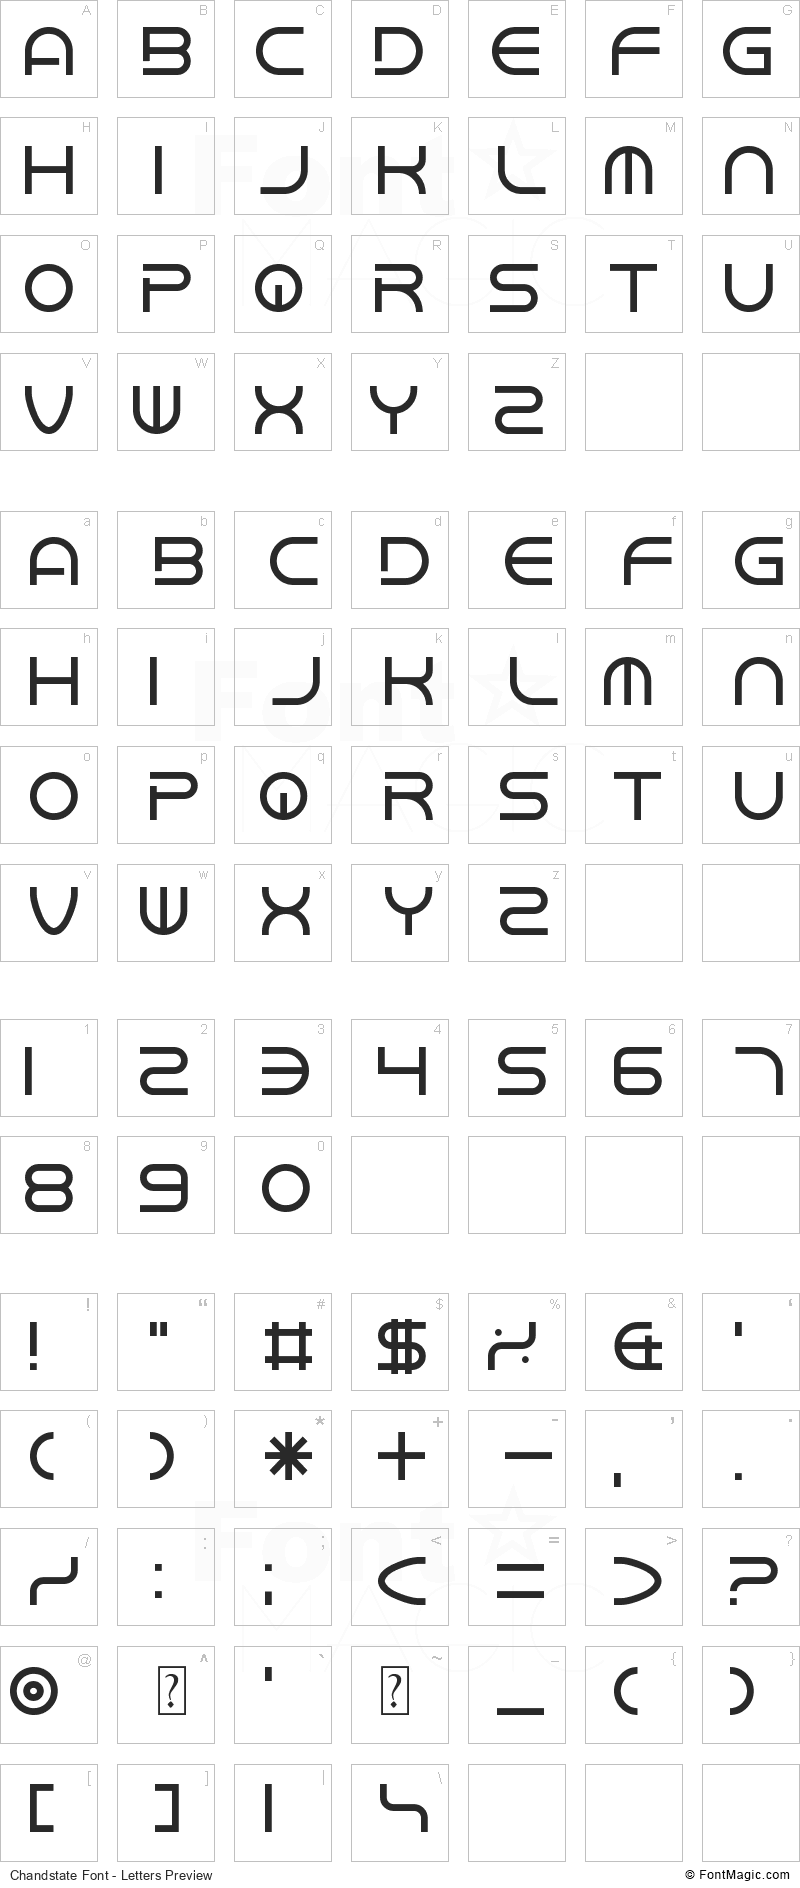 Chandstate Font - All Latters Preview Chart